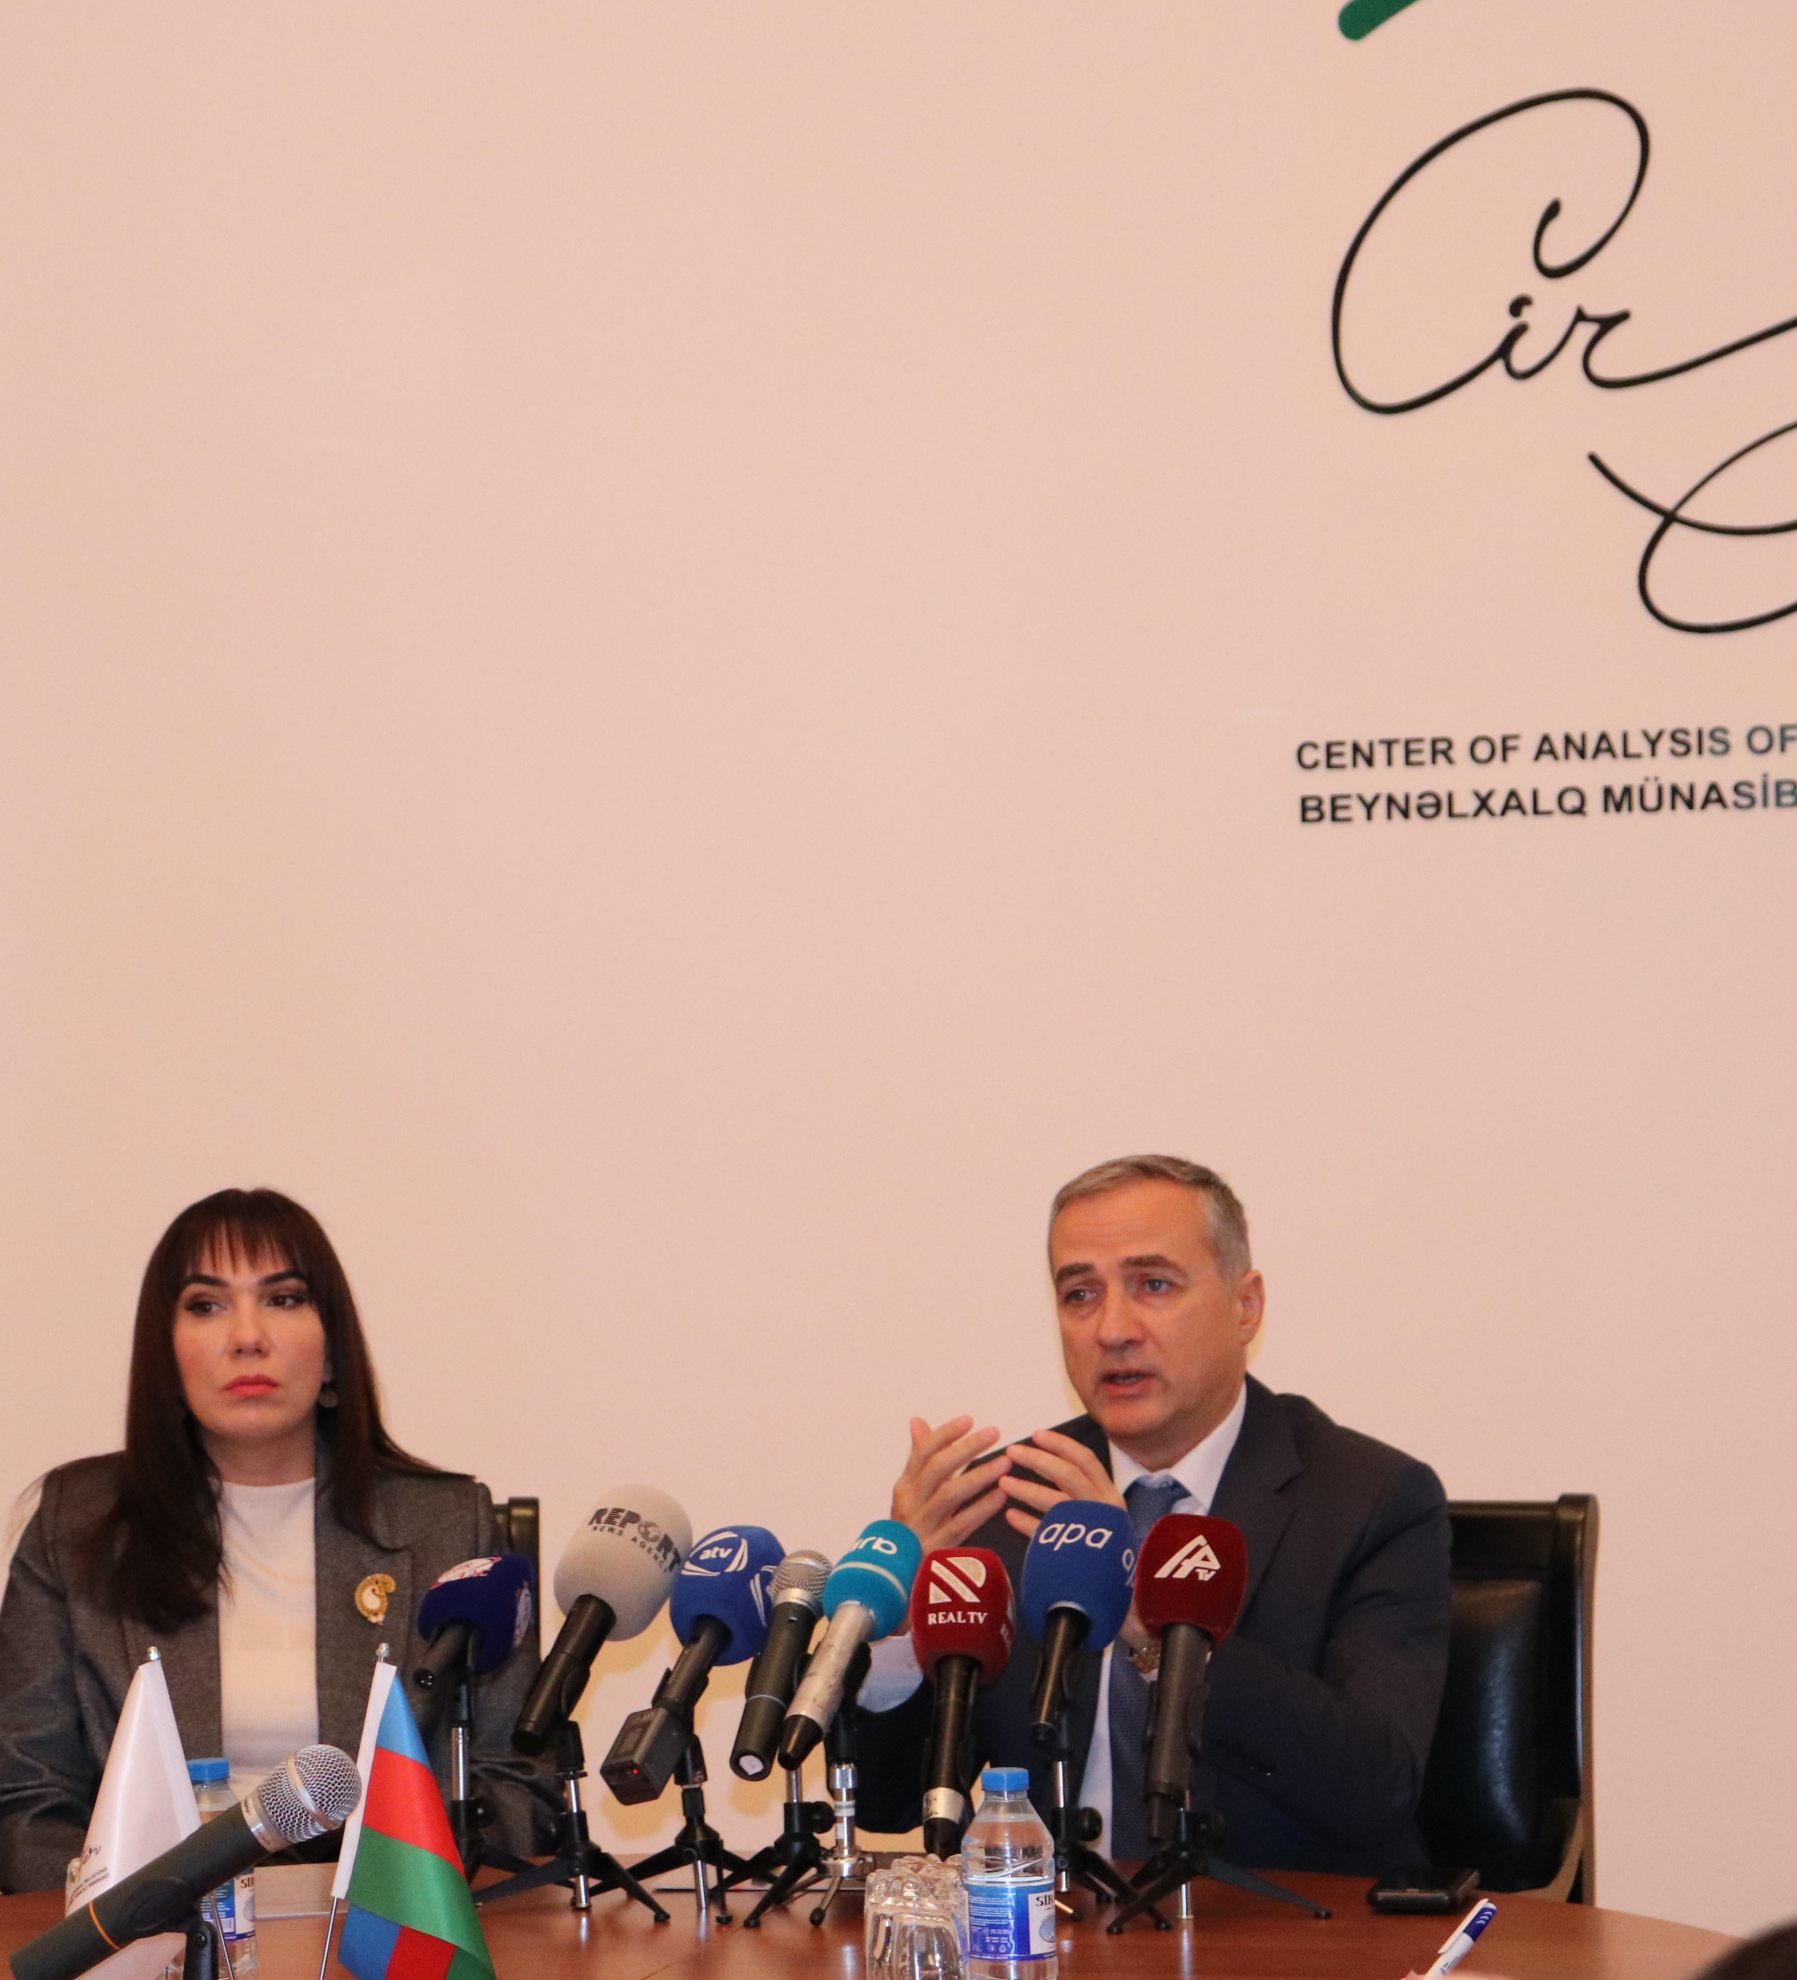 A press conference was held on the AIR Center’s activities during 2022 